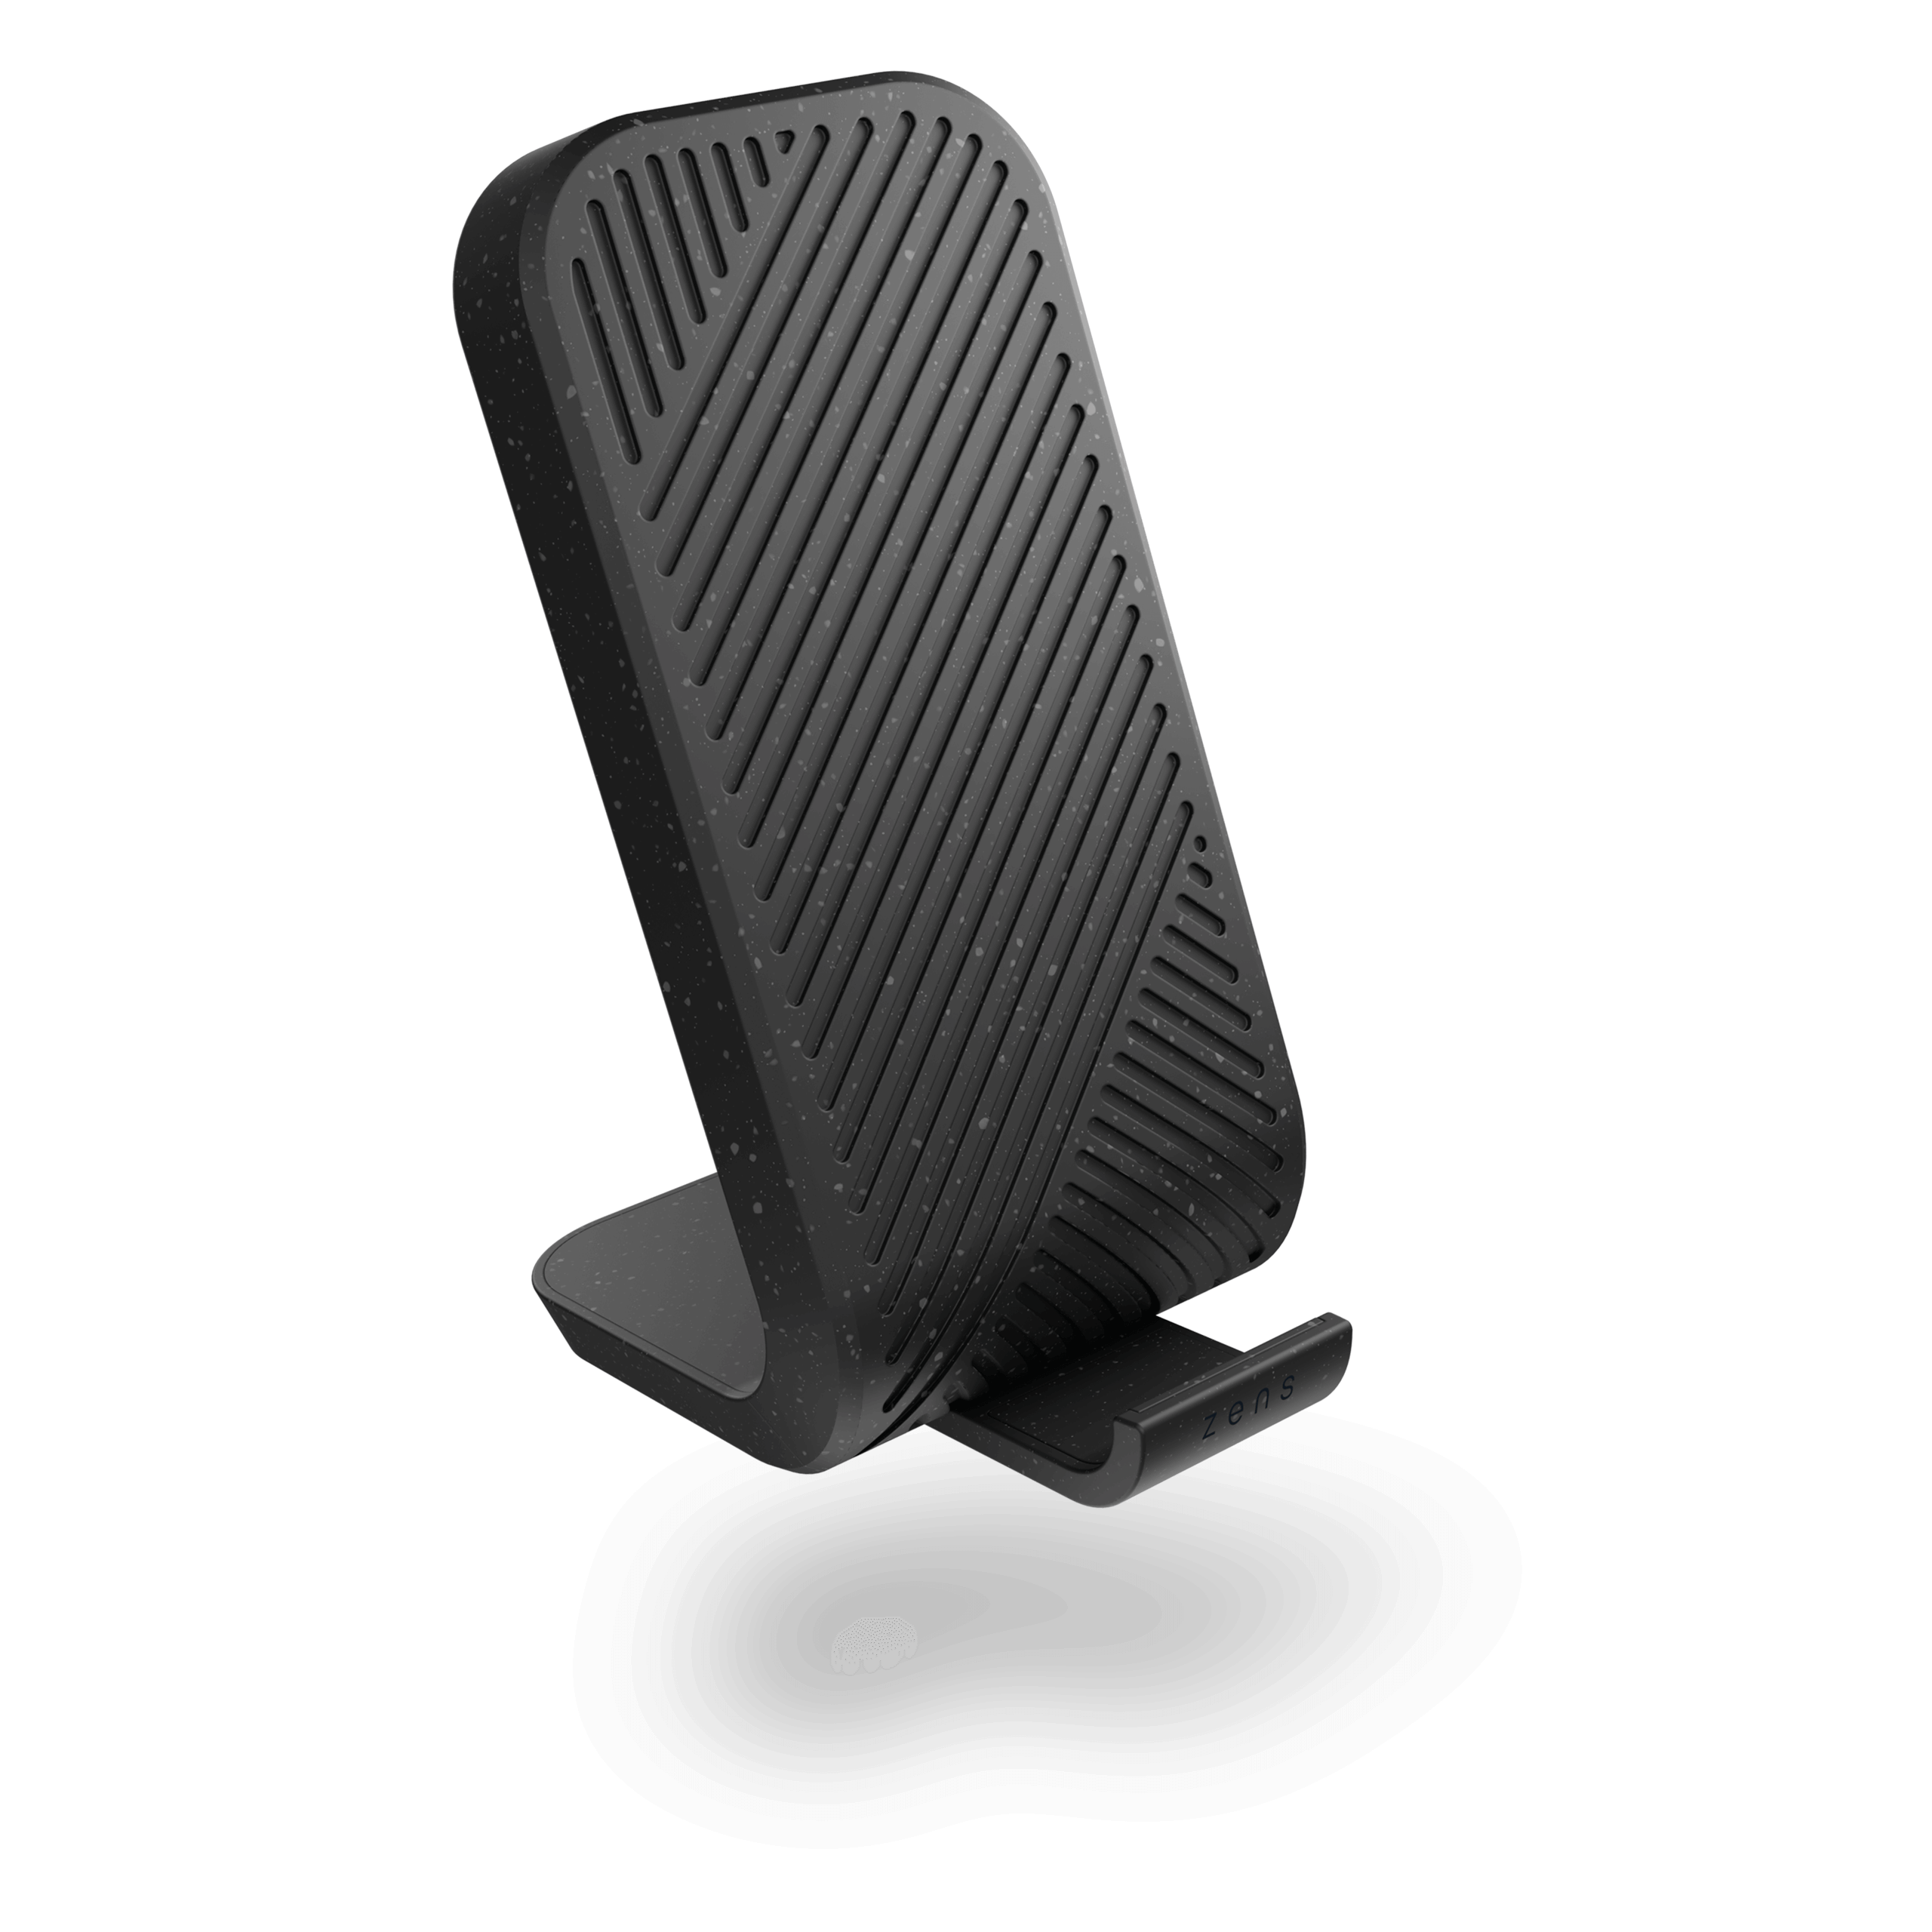 ZEMSC2P - Zens Modular Stand Wireless Charger Main Station Front Side View